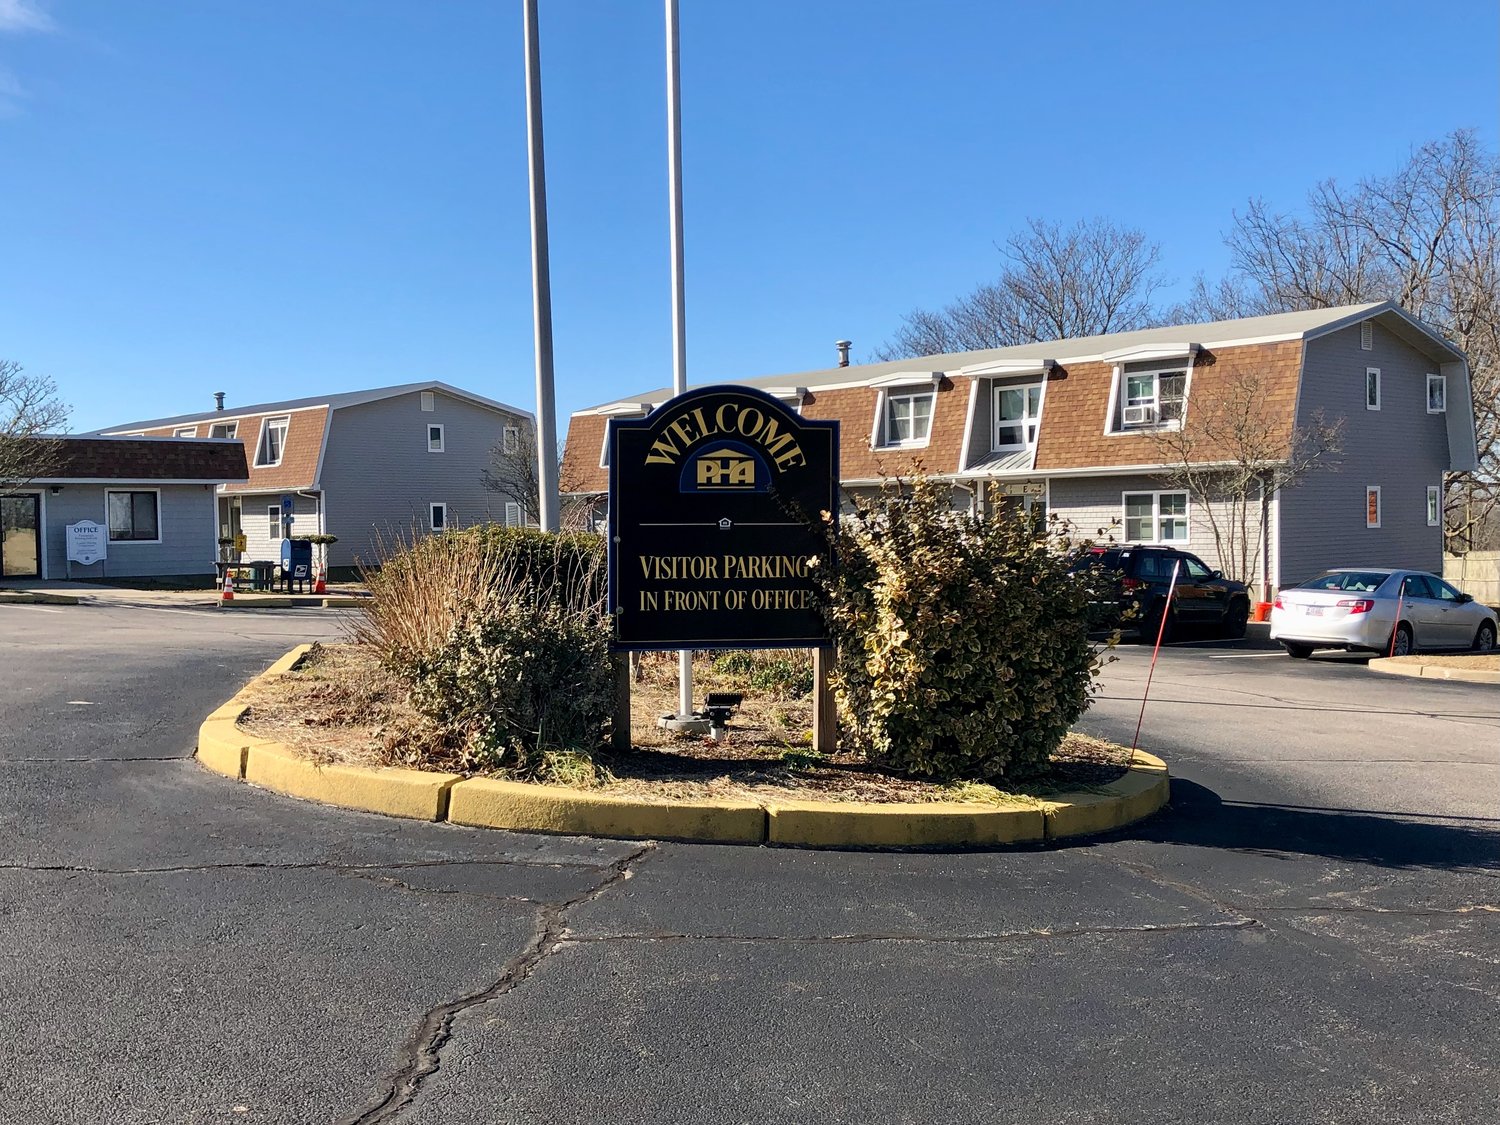 Residents of Quaker Manor/Estates have been complaining about maintenance and management issues for the past several years. However, Phoenix Property Management, which took over management in the beginning of 2021, has assured tenants there is a light at the end of the tunnel.